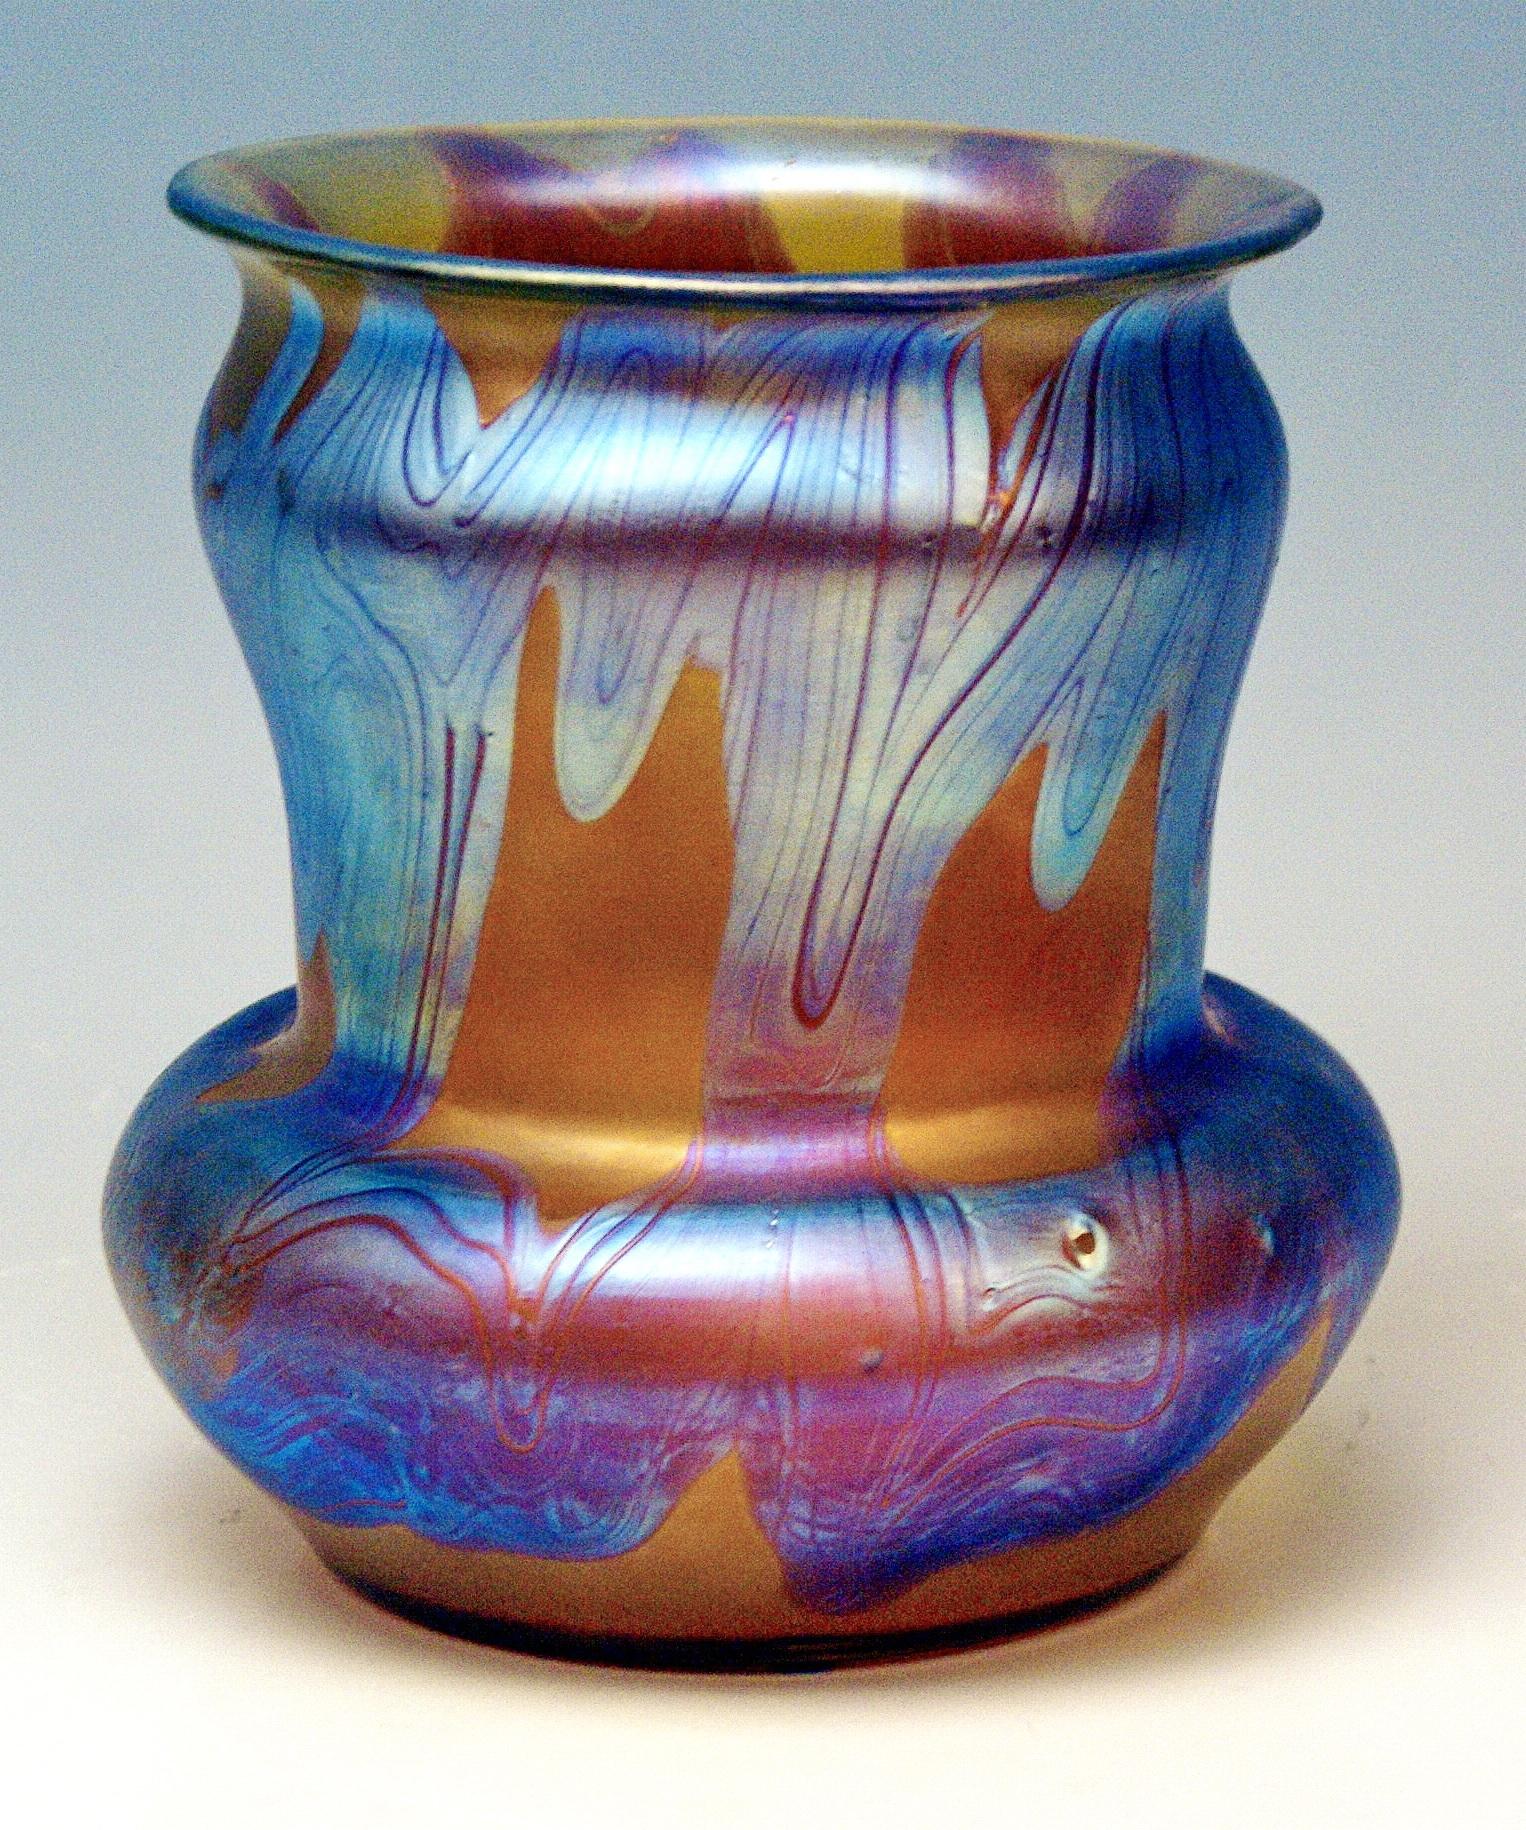 Vase Loetz (Lötz) Widow Klostermuehle Bohemia Art Nouveau

Made by Loetz, Klostermuehle (Bohemia), circa 1900
Decor: Phaenomen Genre 7773 or PG 29
 
It is an interesting Loetz Art Nouveau vase of cylindric type with smooth wide and overhanging